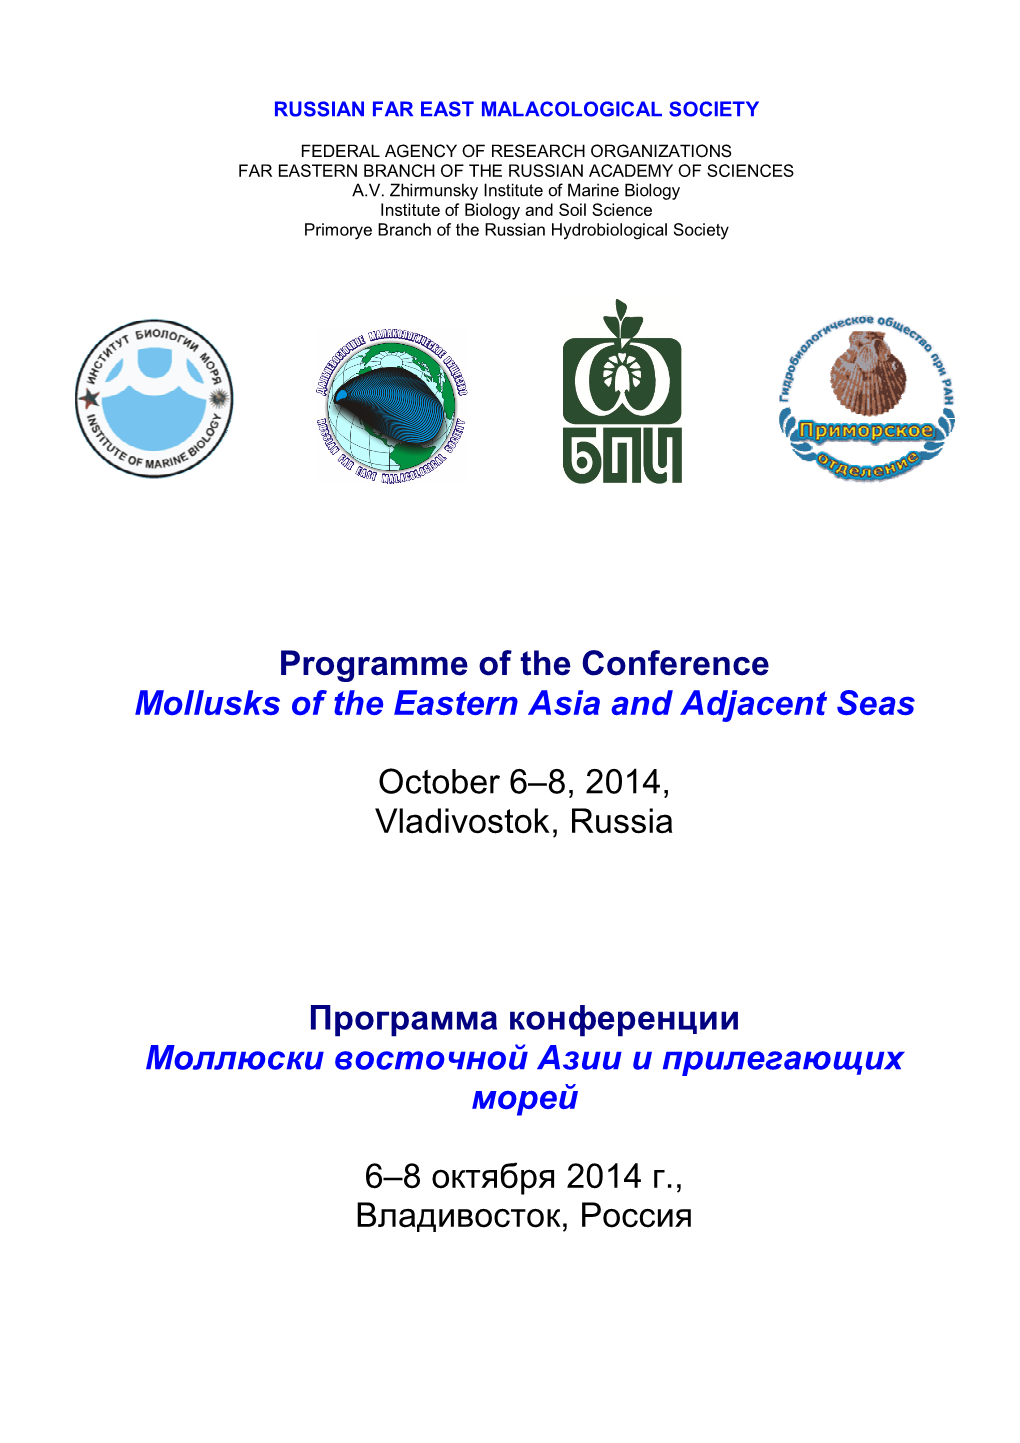 Programme of the Conference Mollusks of the Eastern Asia and Adjacent Seas